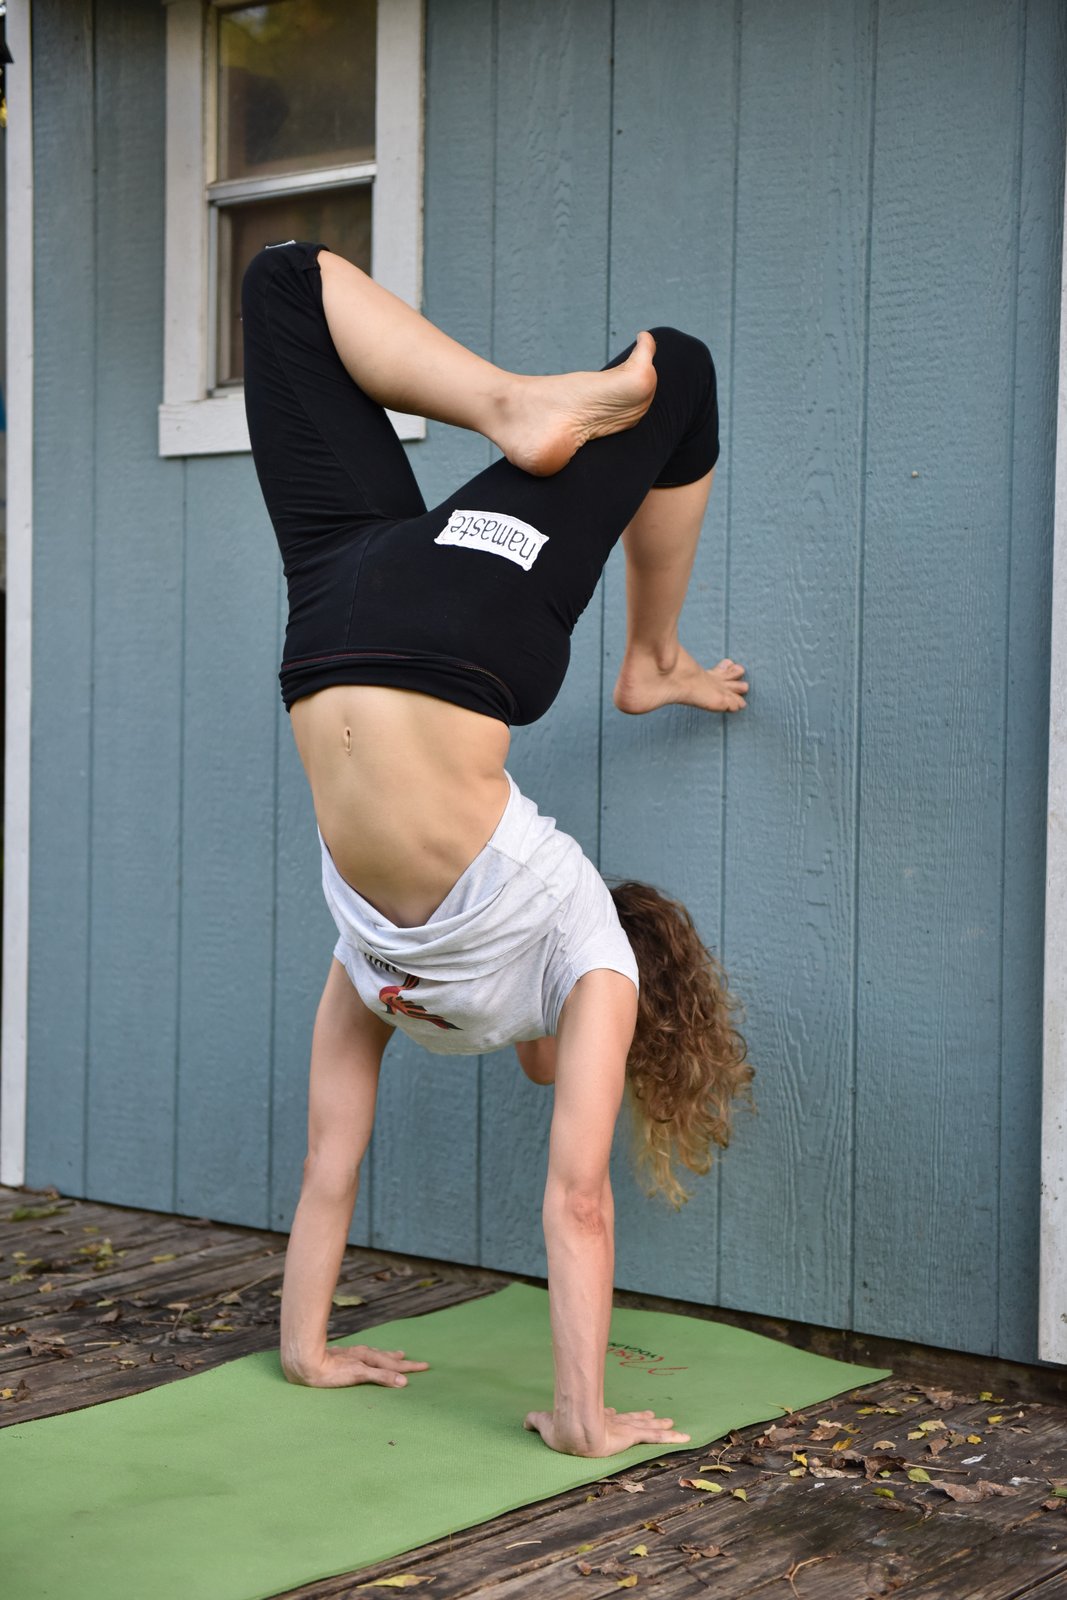 Yoga instructor sets world record by holding scorpion pose for nearly 30  minutes | indy100